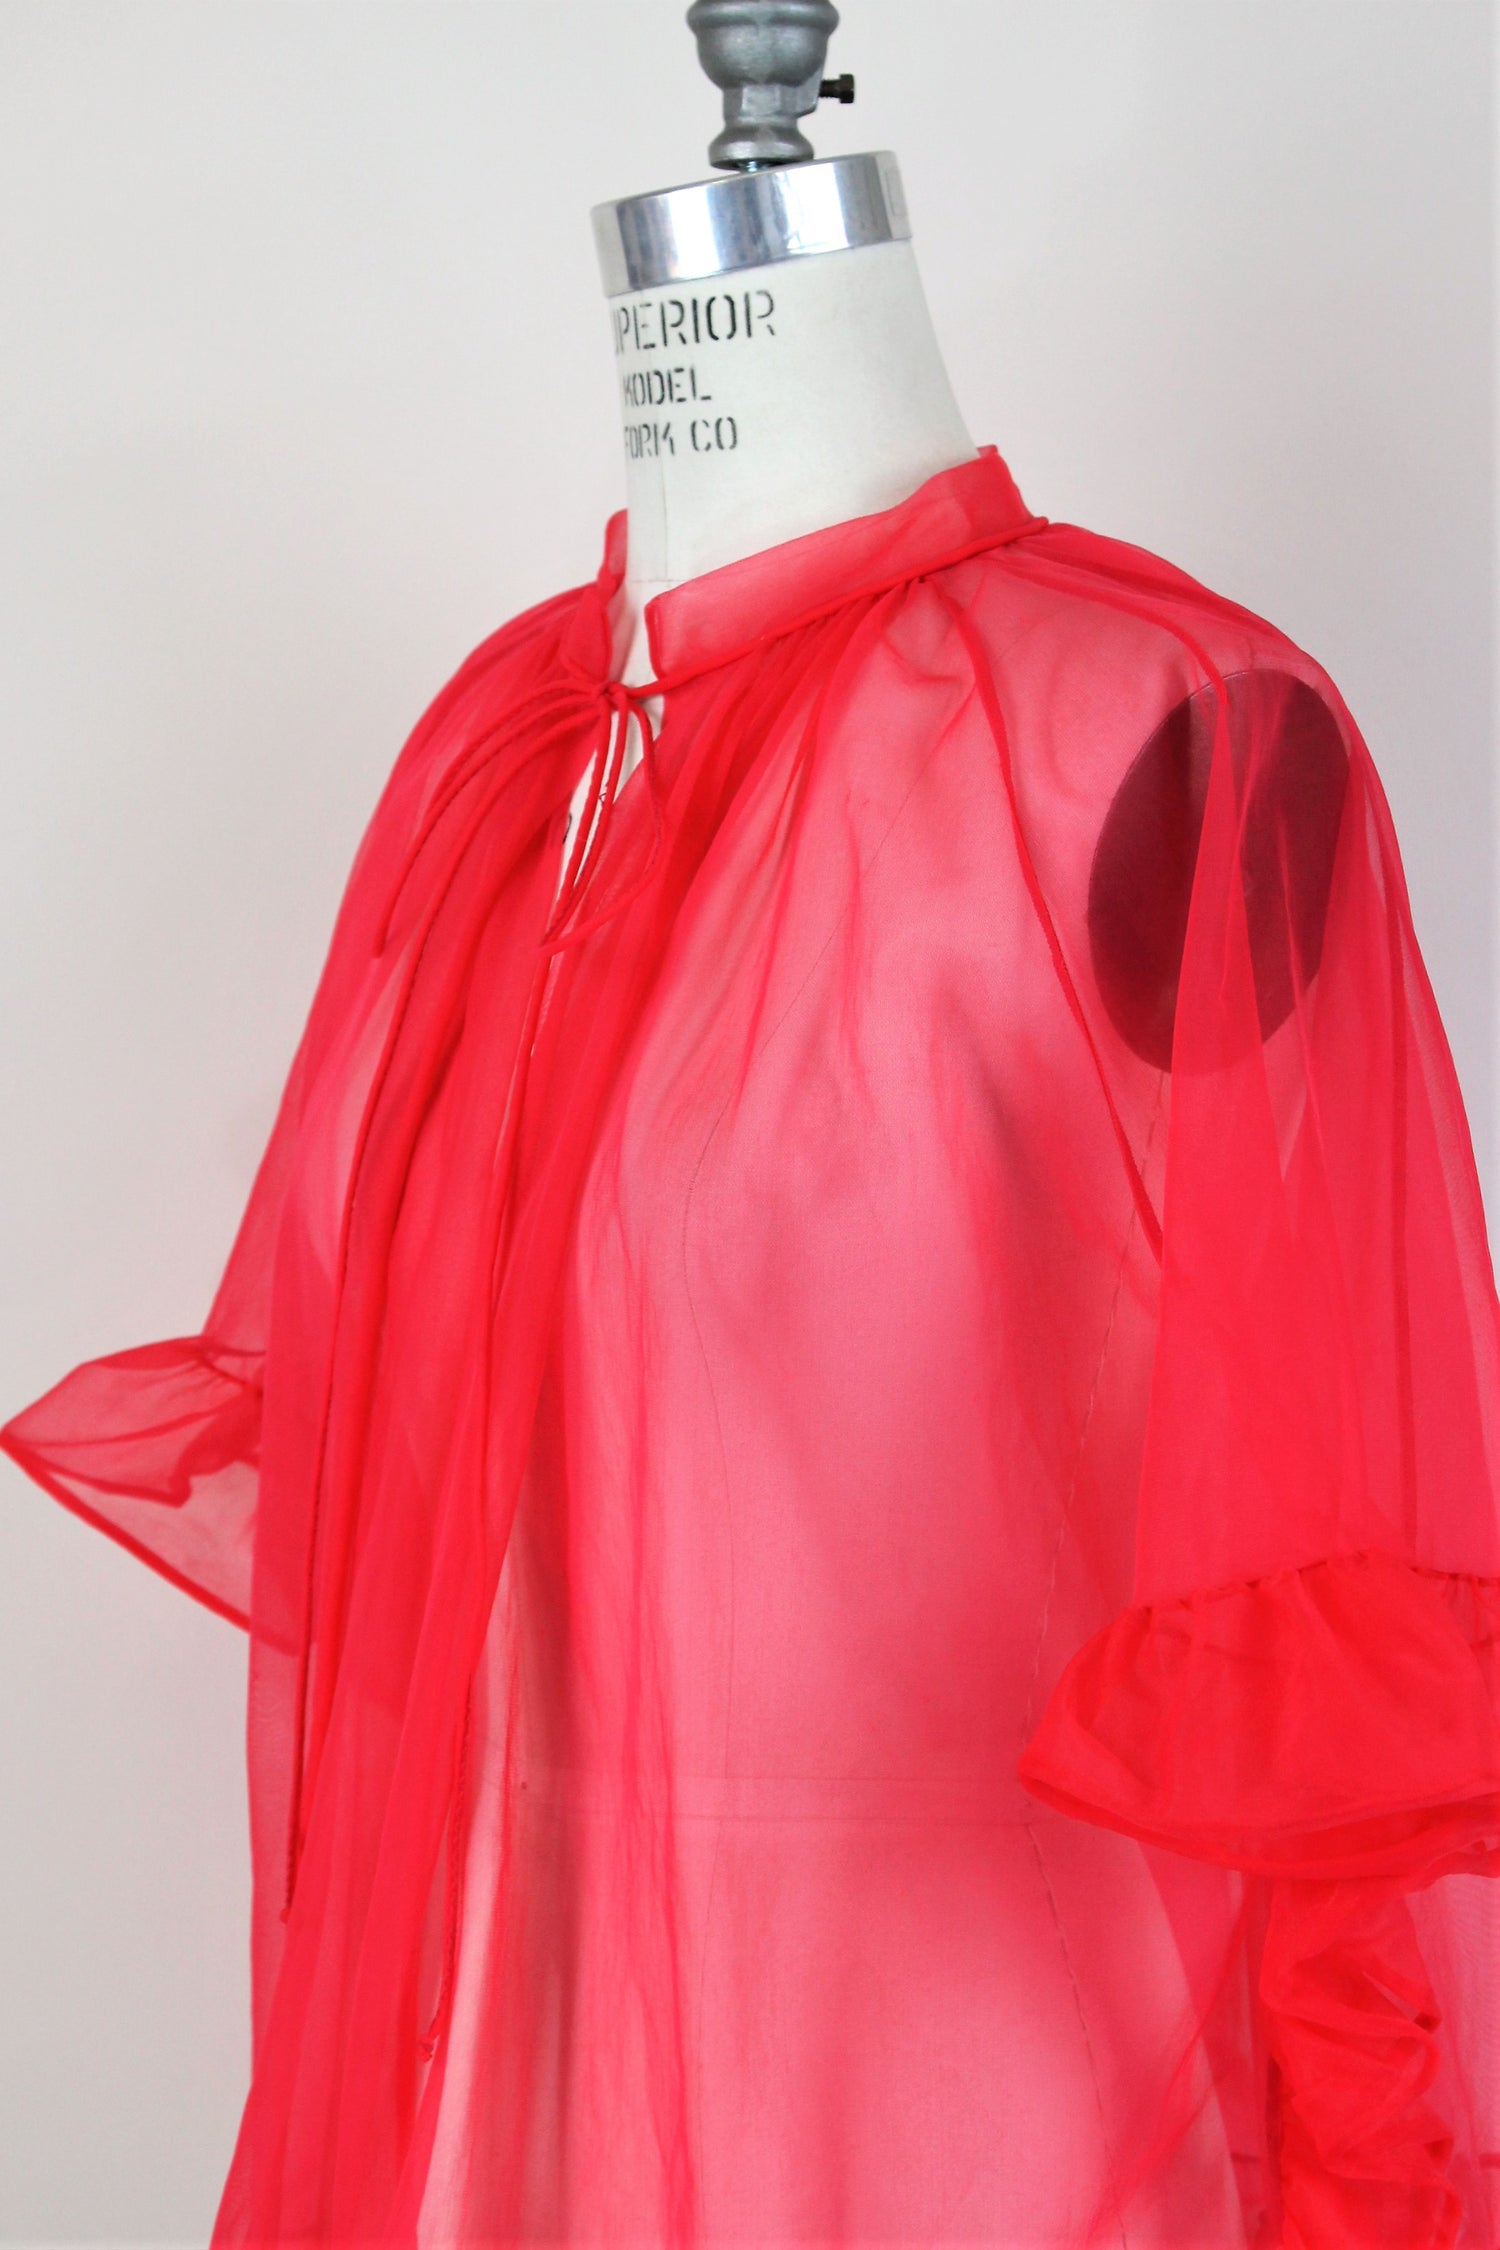 Vintage 1960s Red Peignoir Bed Jacket by Gaymode